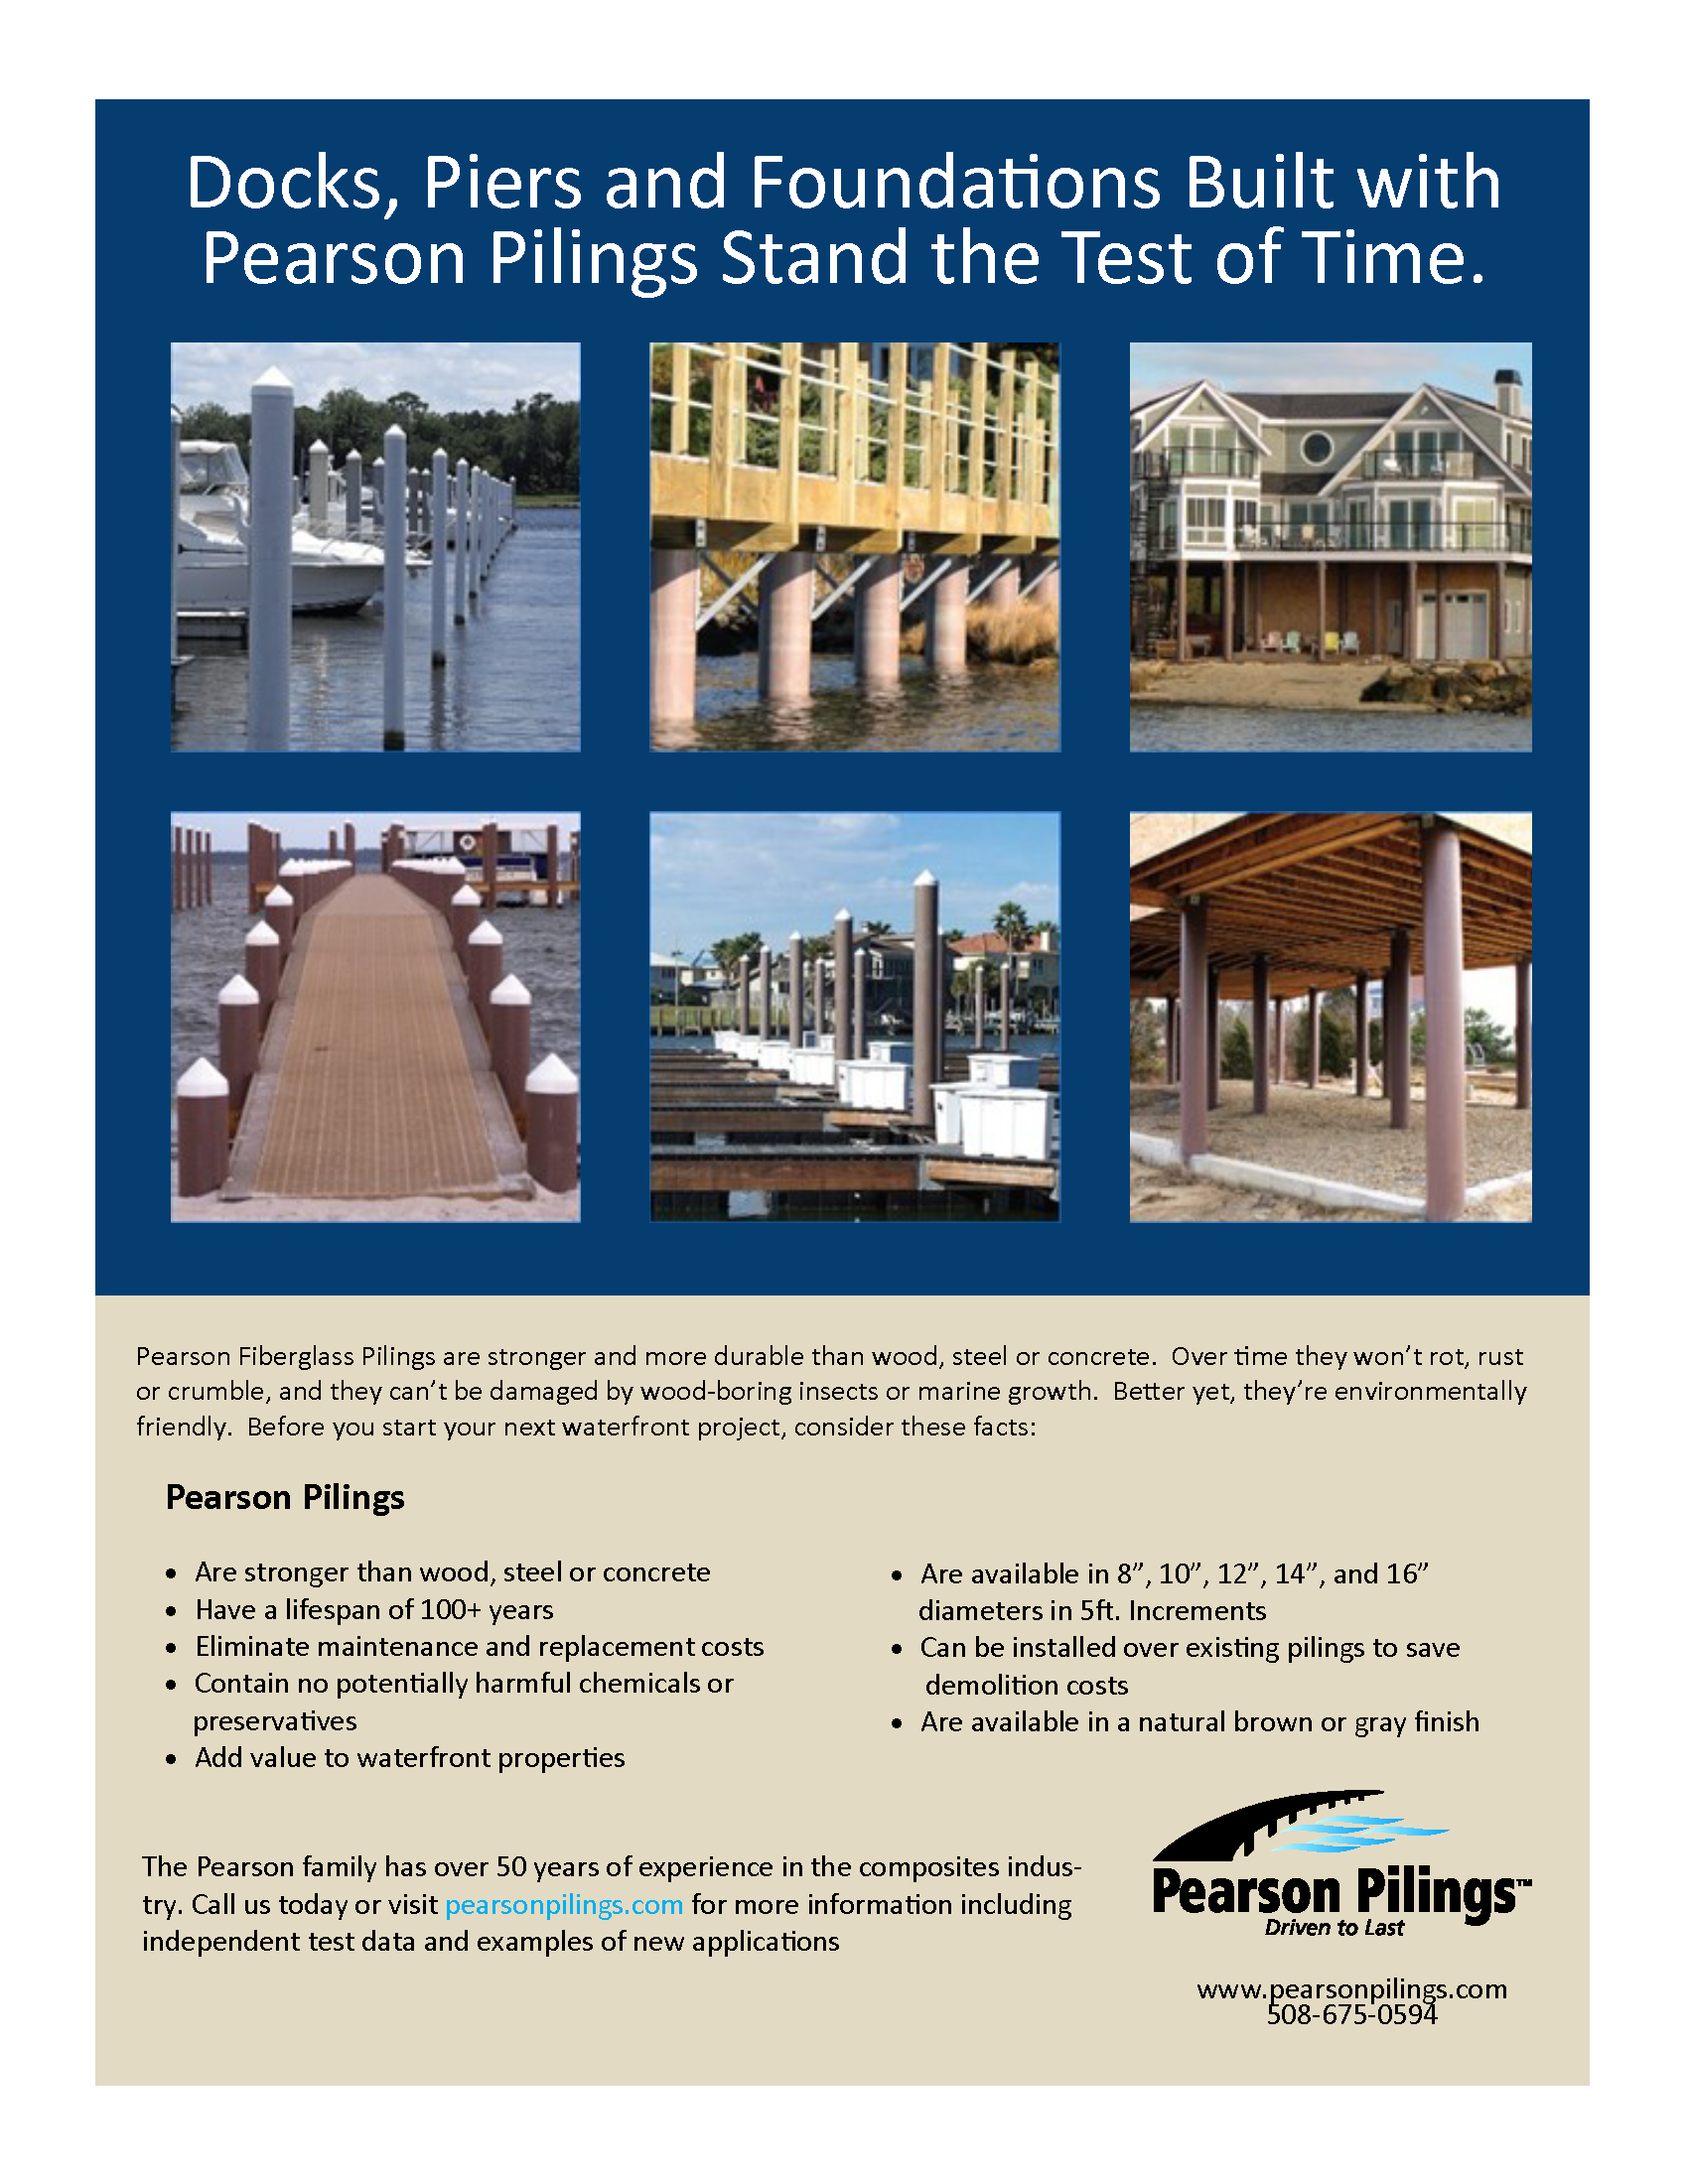 Pearson Pilings General Brochure 2016_Page_1.png